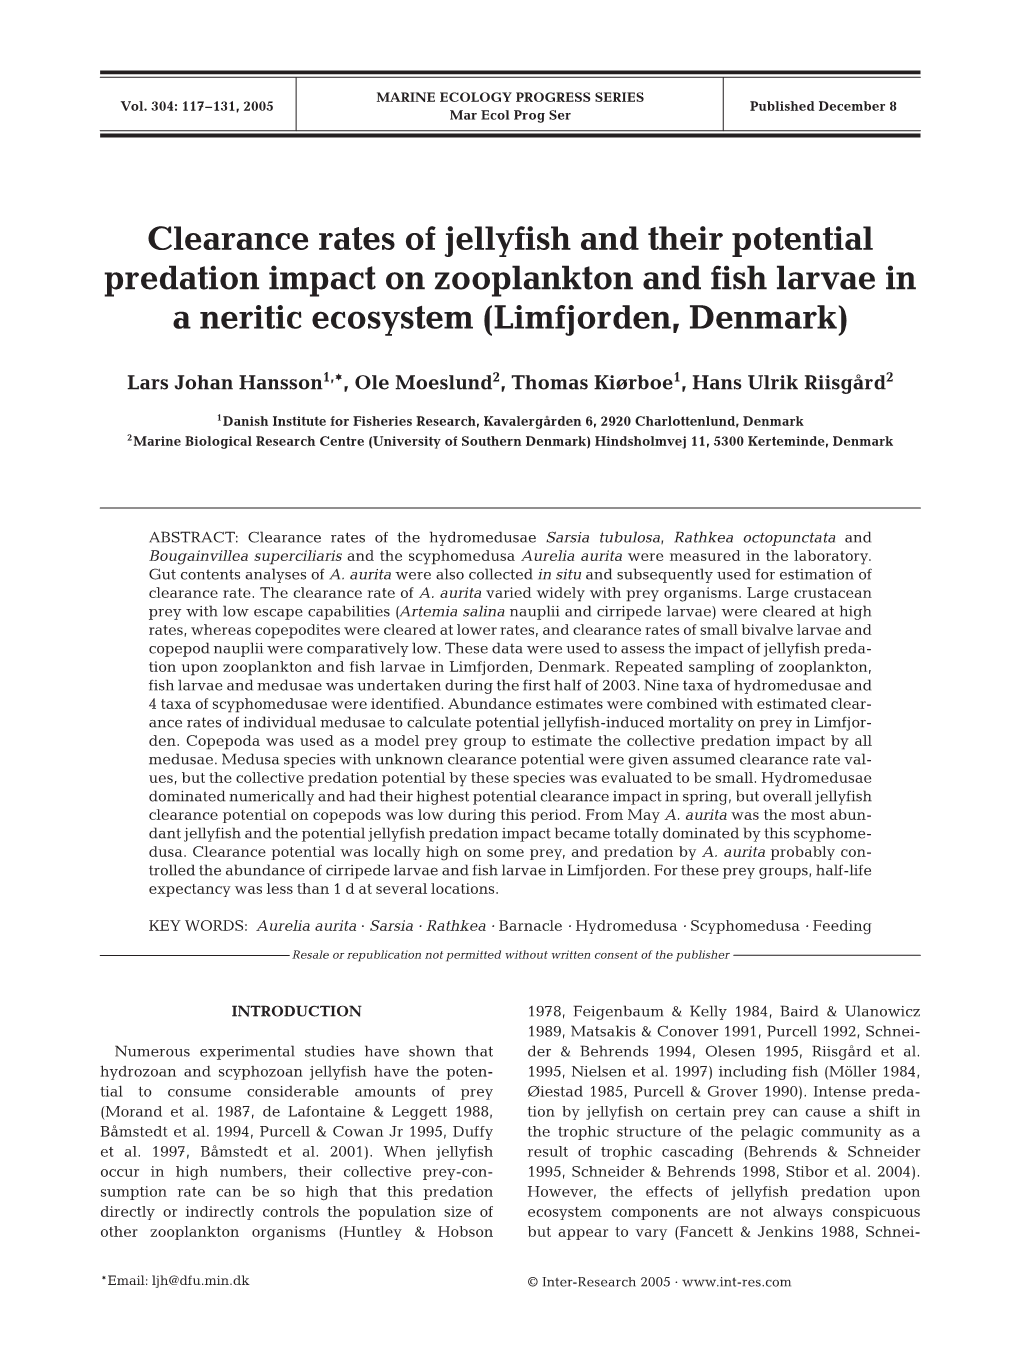 Clearance Rates of Jellyfish and Their Potential Predation Impact on Zooplankton and Fish Larvae in a Neritic Ecosystem (Limfjorden, Denmark)